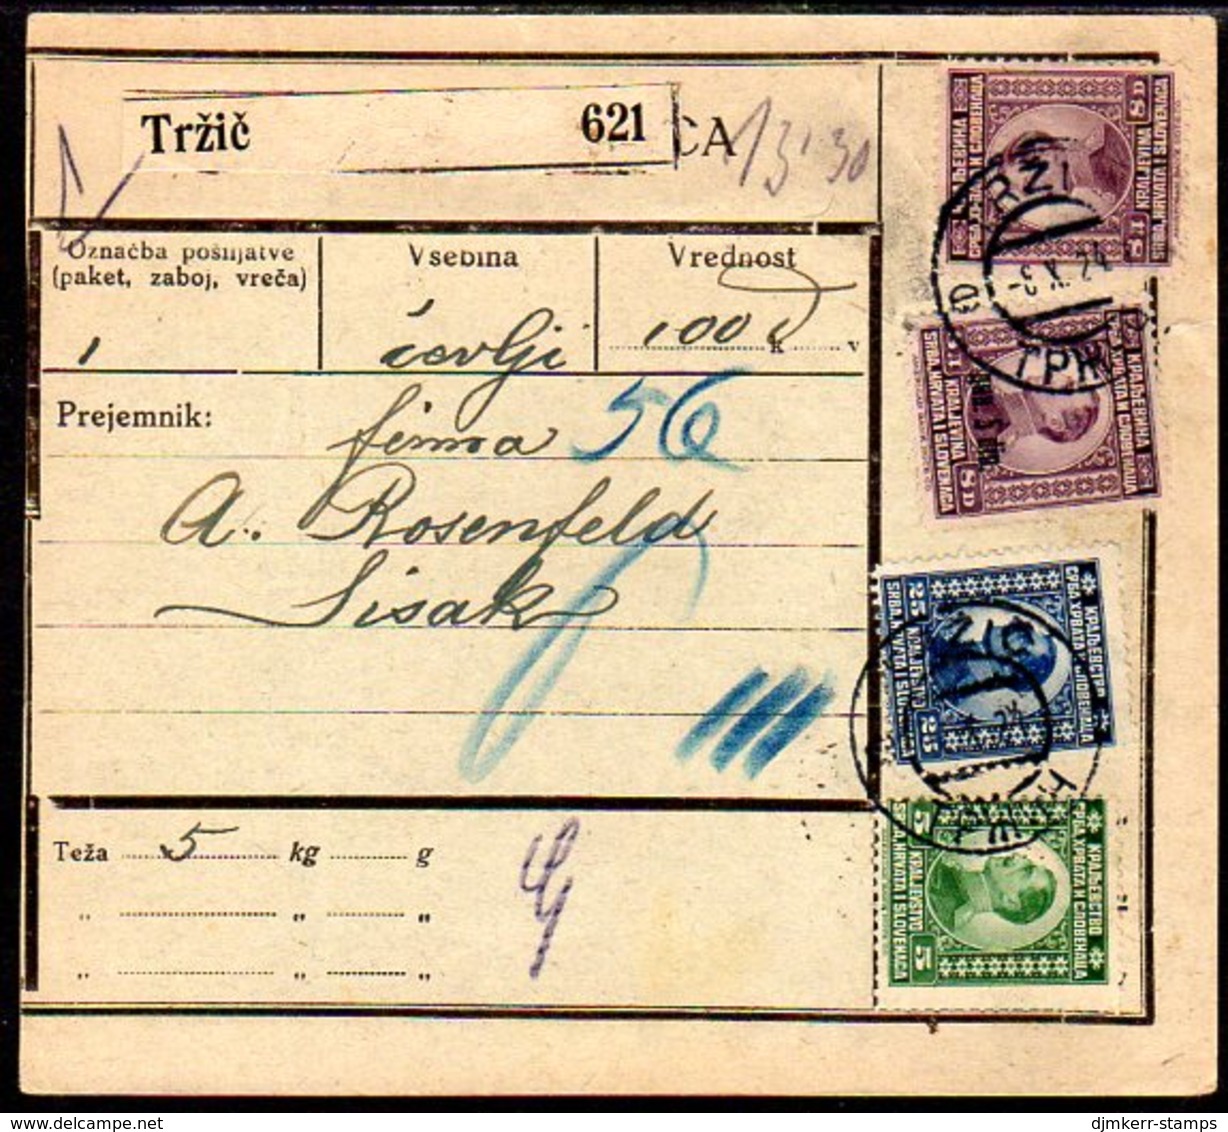 YUGOSLAVIA 1924 Parcel Card With Definitive Franking And 5 D. On 8 D. Surcharge - Covers & Documents